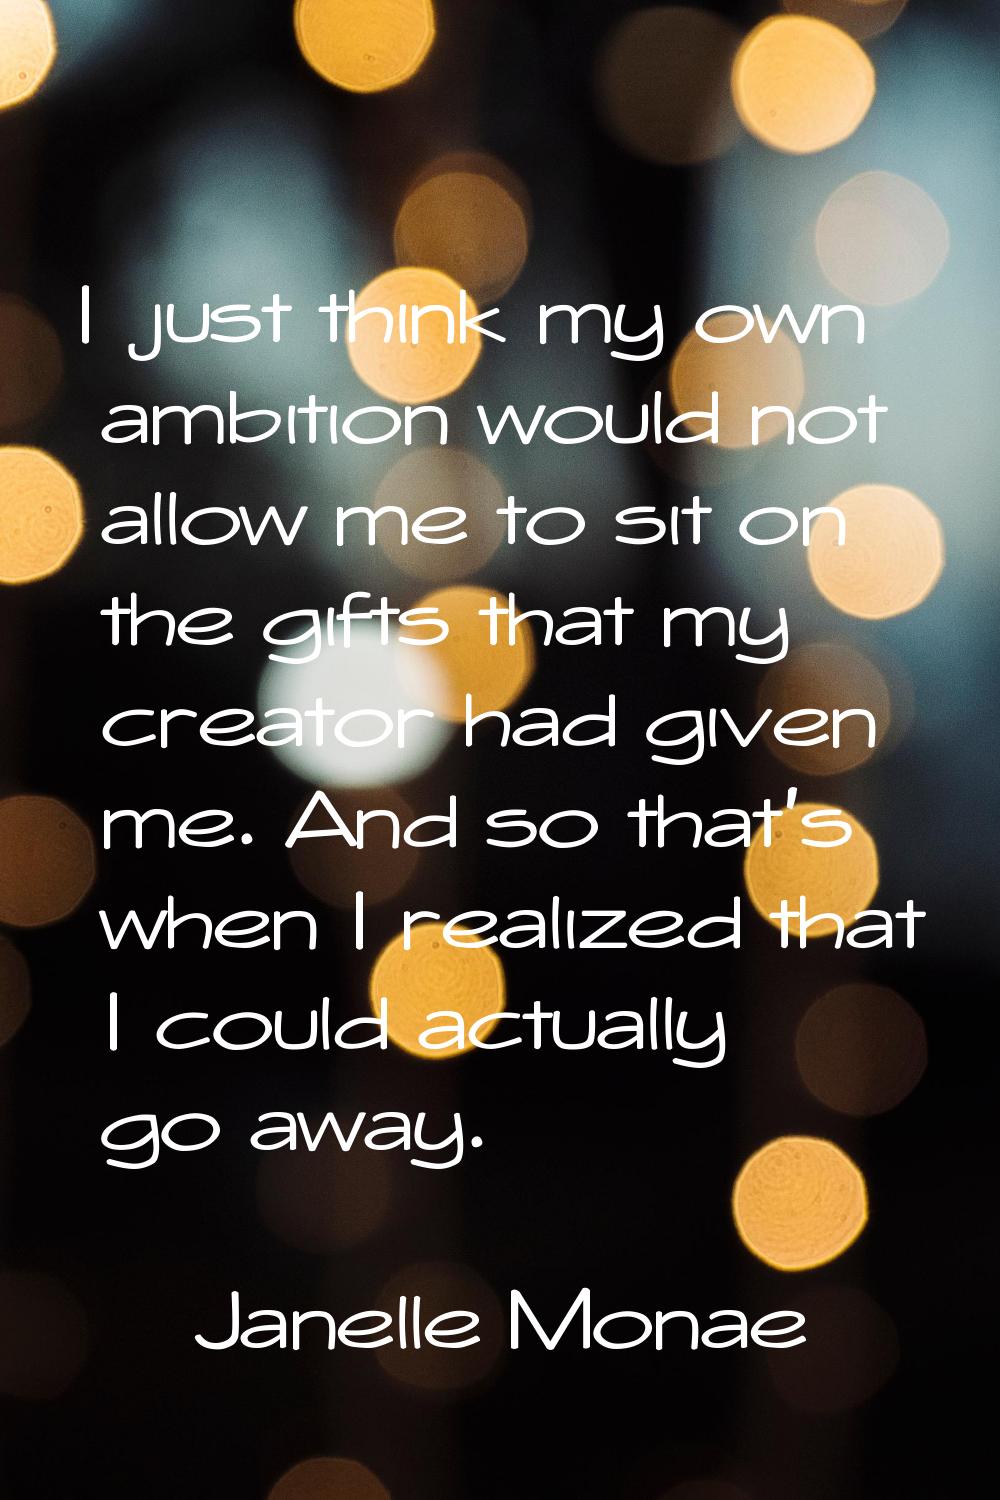 I just think my own ambition would not allow me to sit on the gifts that my creator had given me. A